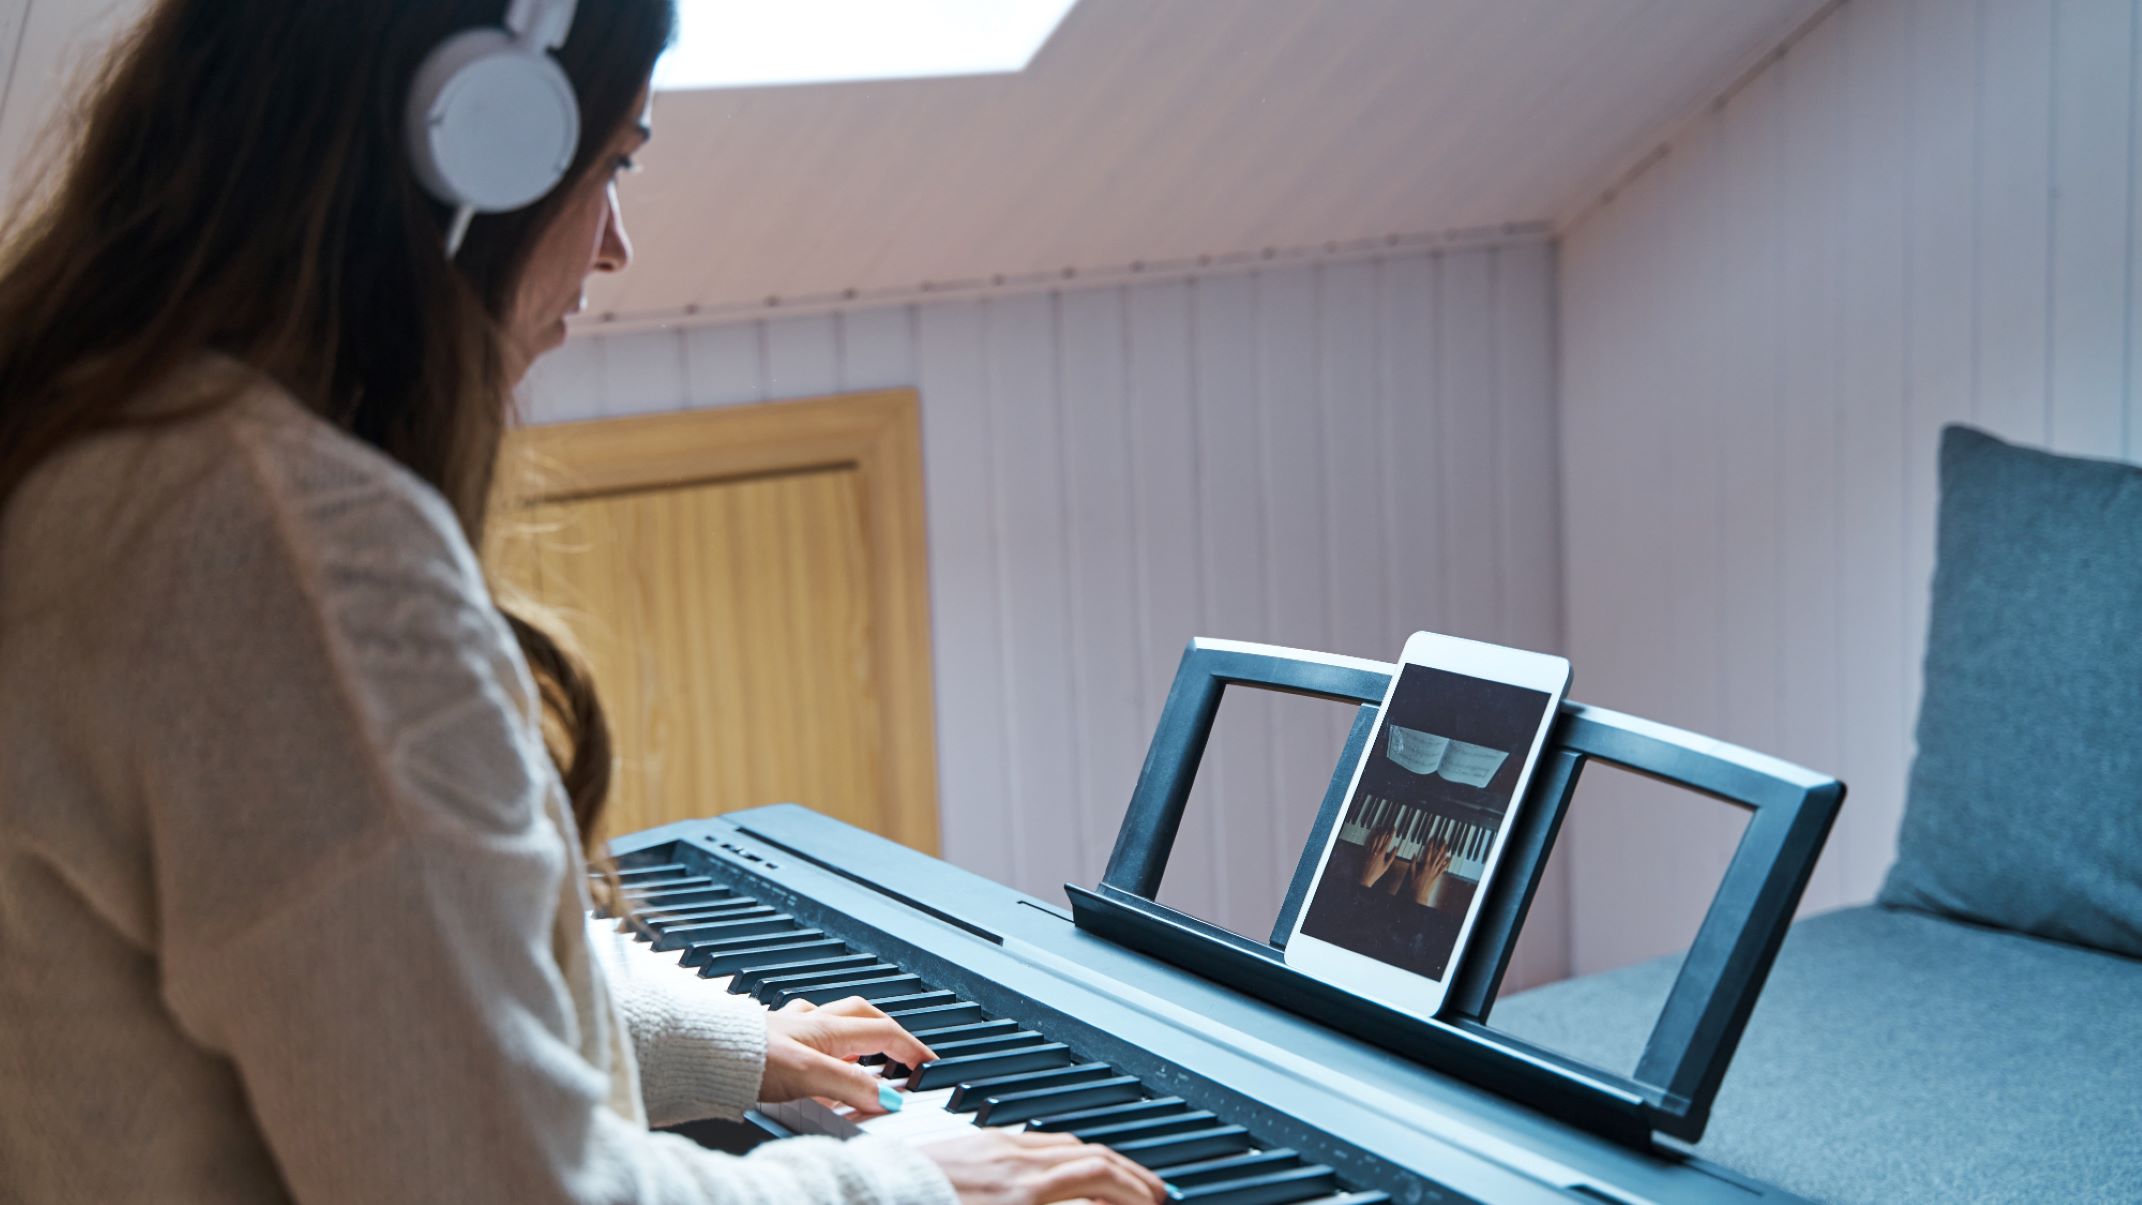 What Digital Piano Is Best For Beginners